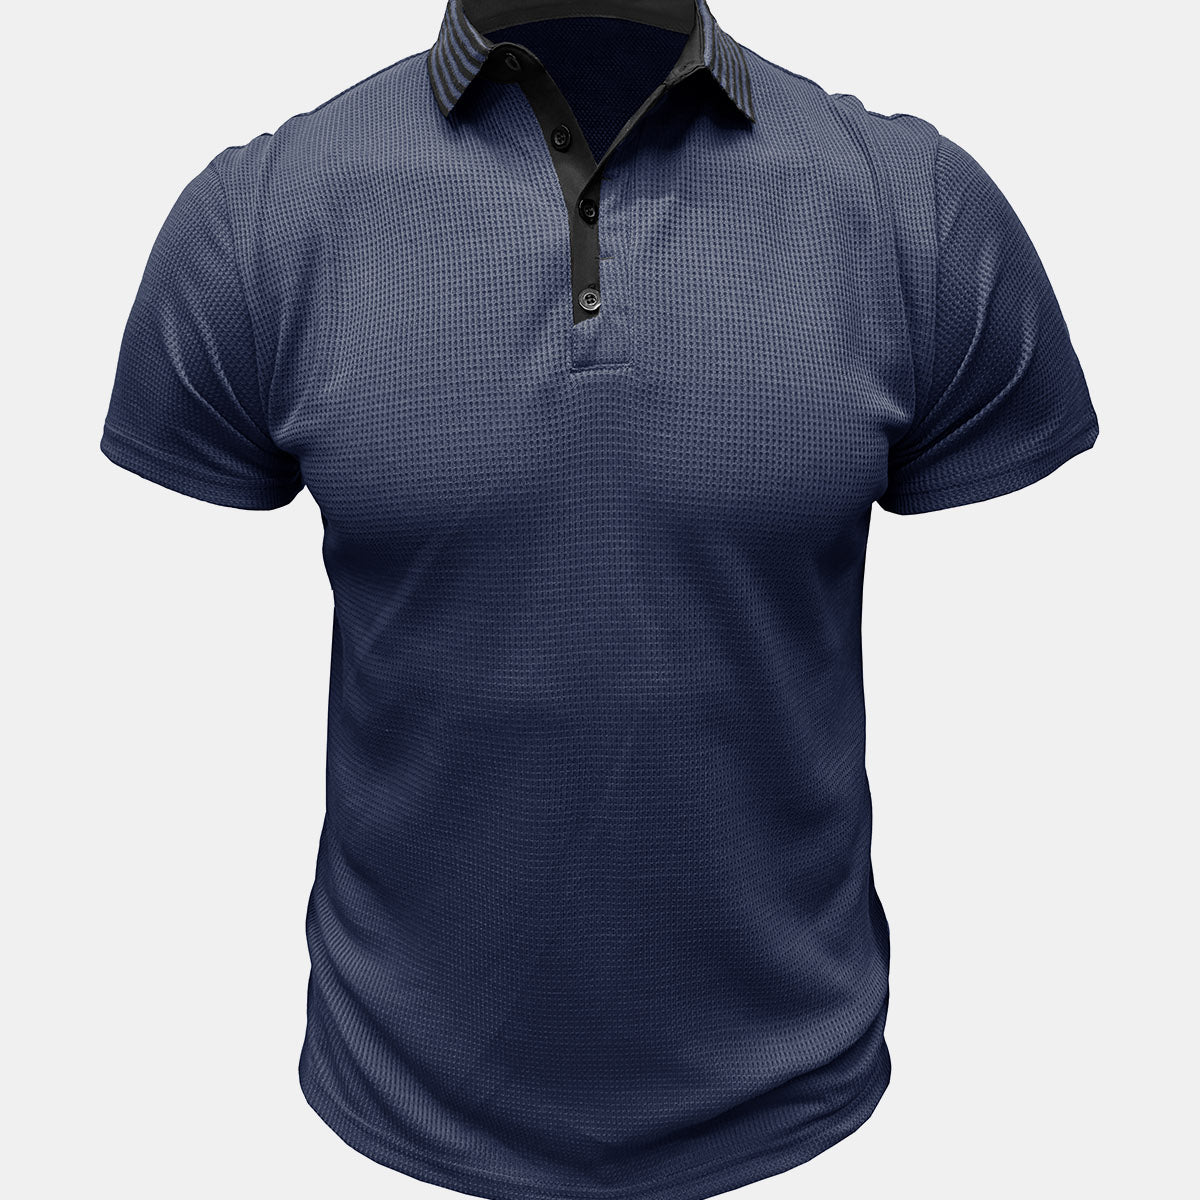 Men's Solid Color Leisure Short Sleeve Summer Polo Shirt